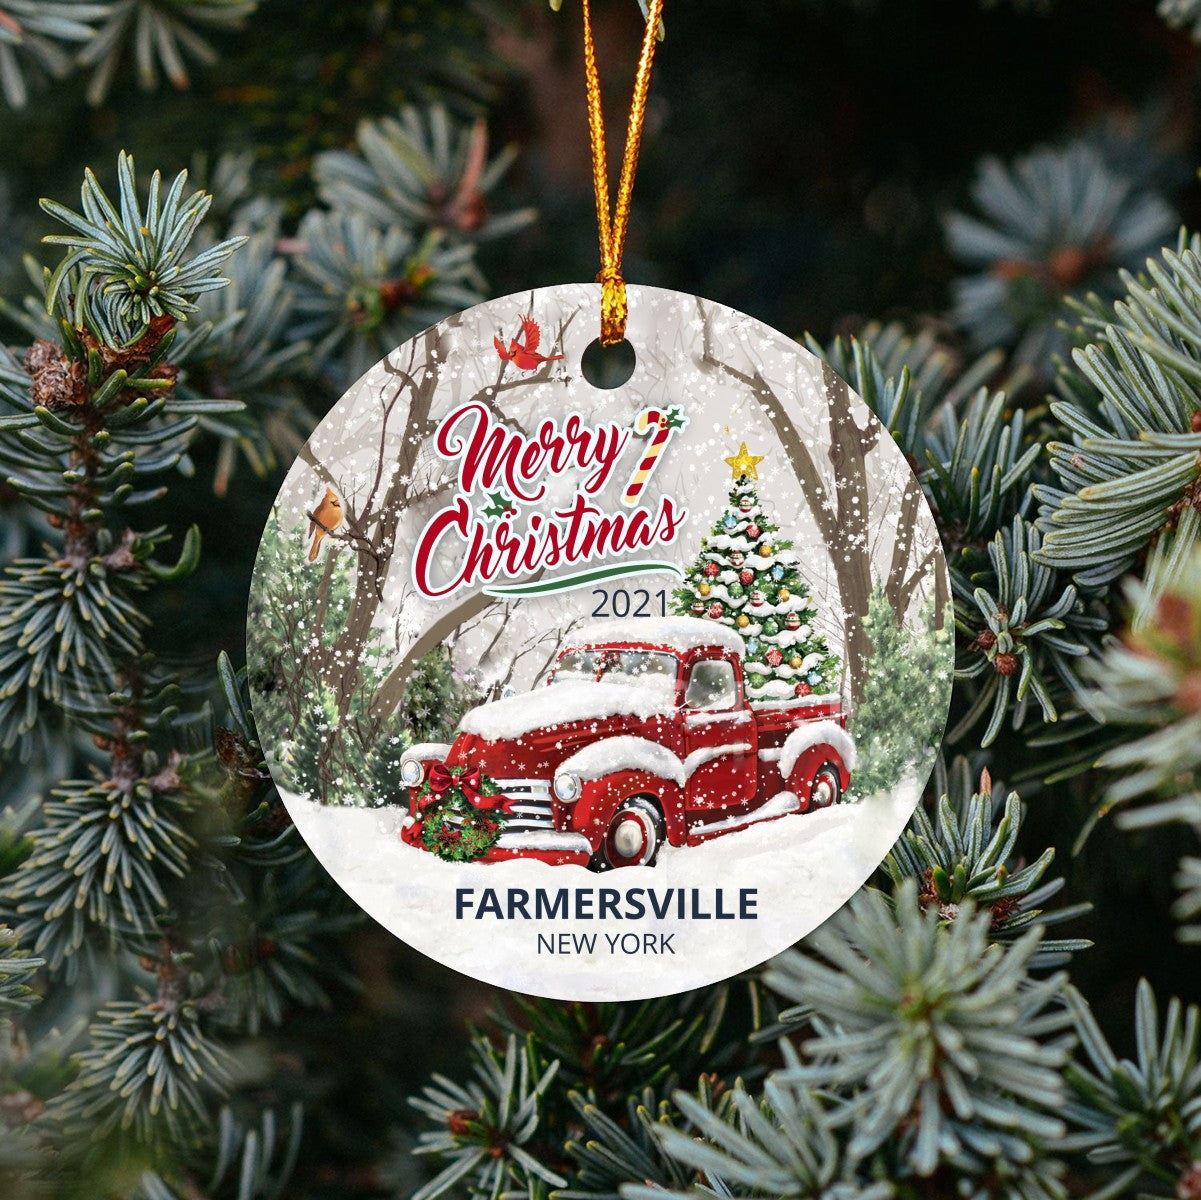 Christmas Tree Ornaments Farmersville - Ornament With Name City, State Farmersville New York NY Ornament - Red Truck Xmas Ornaments 3'' Plastic Gift For Family, Friend And Housewarming